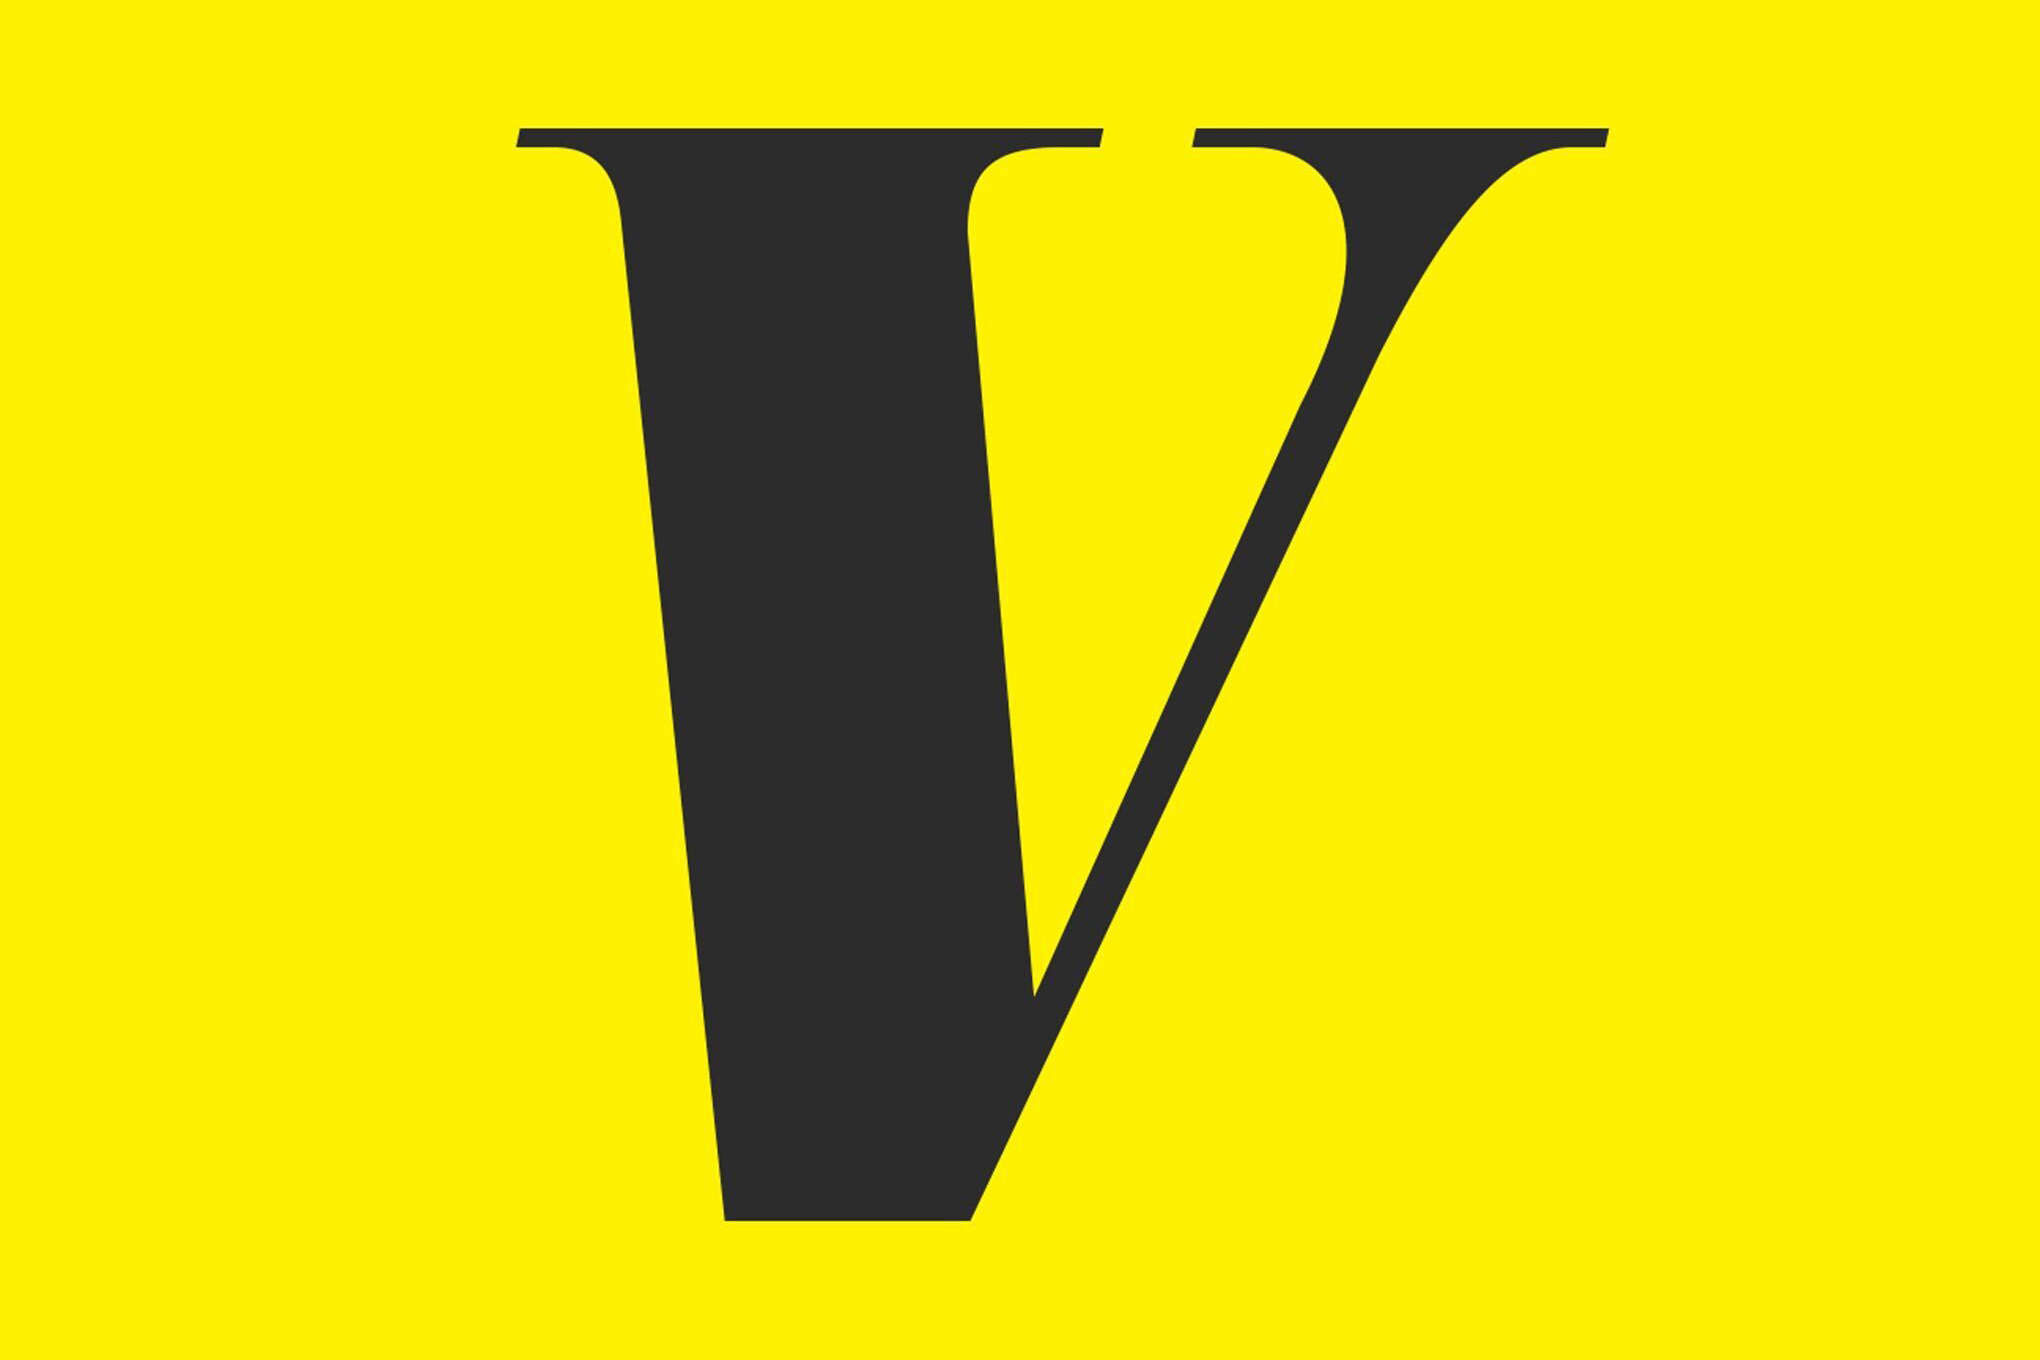 A Vox logo, with a black letter V on a bright yellow background.